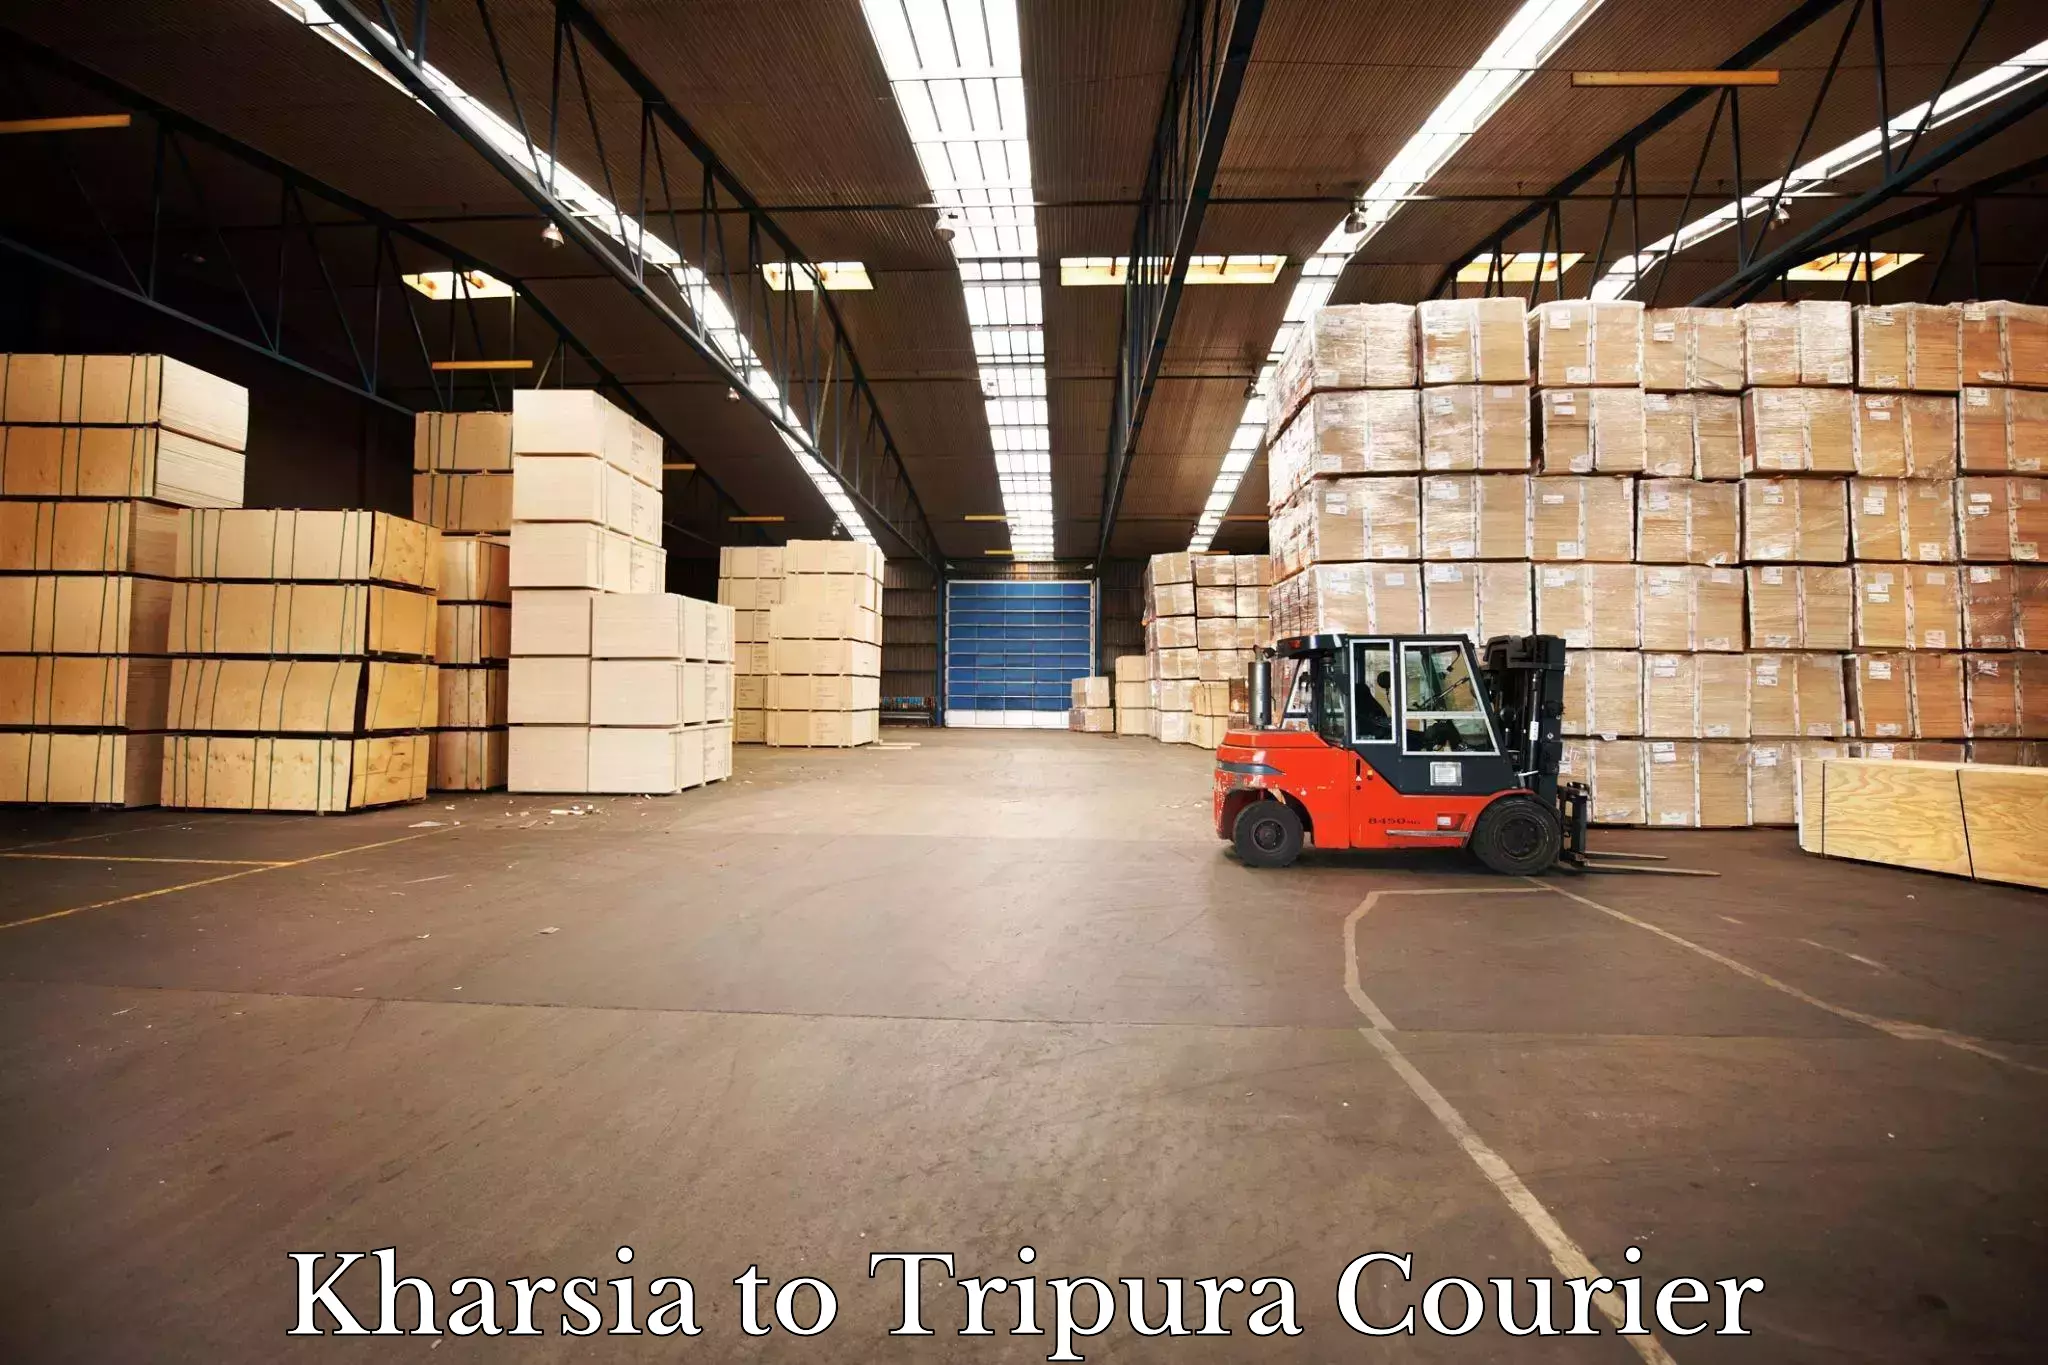 24/7 courier service in Kharsia to Dharmanagar